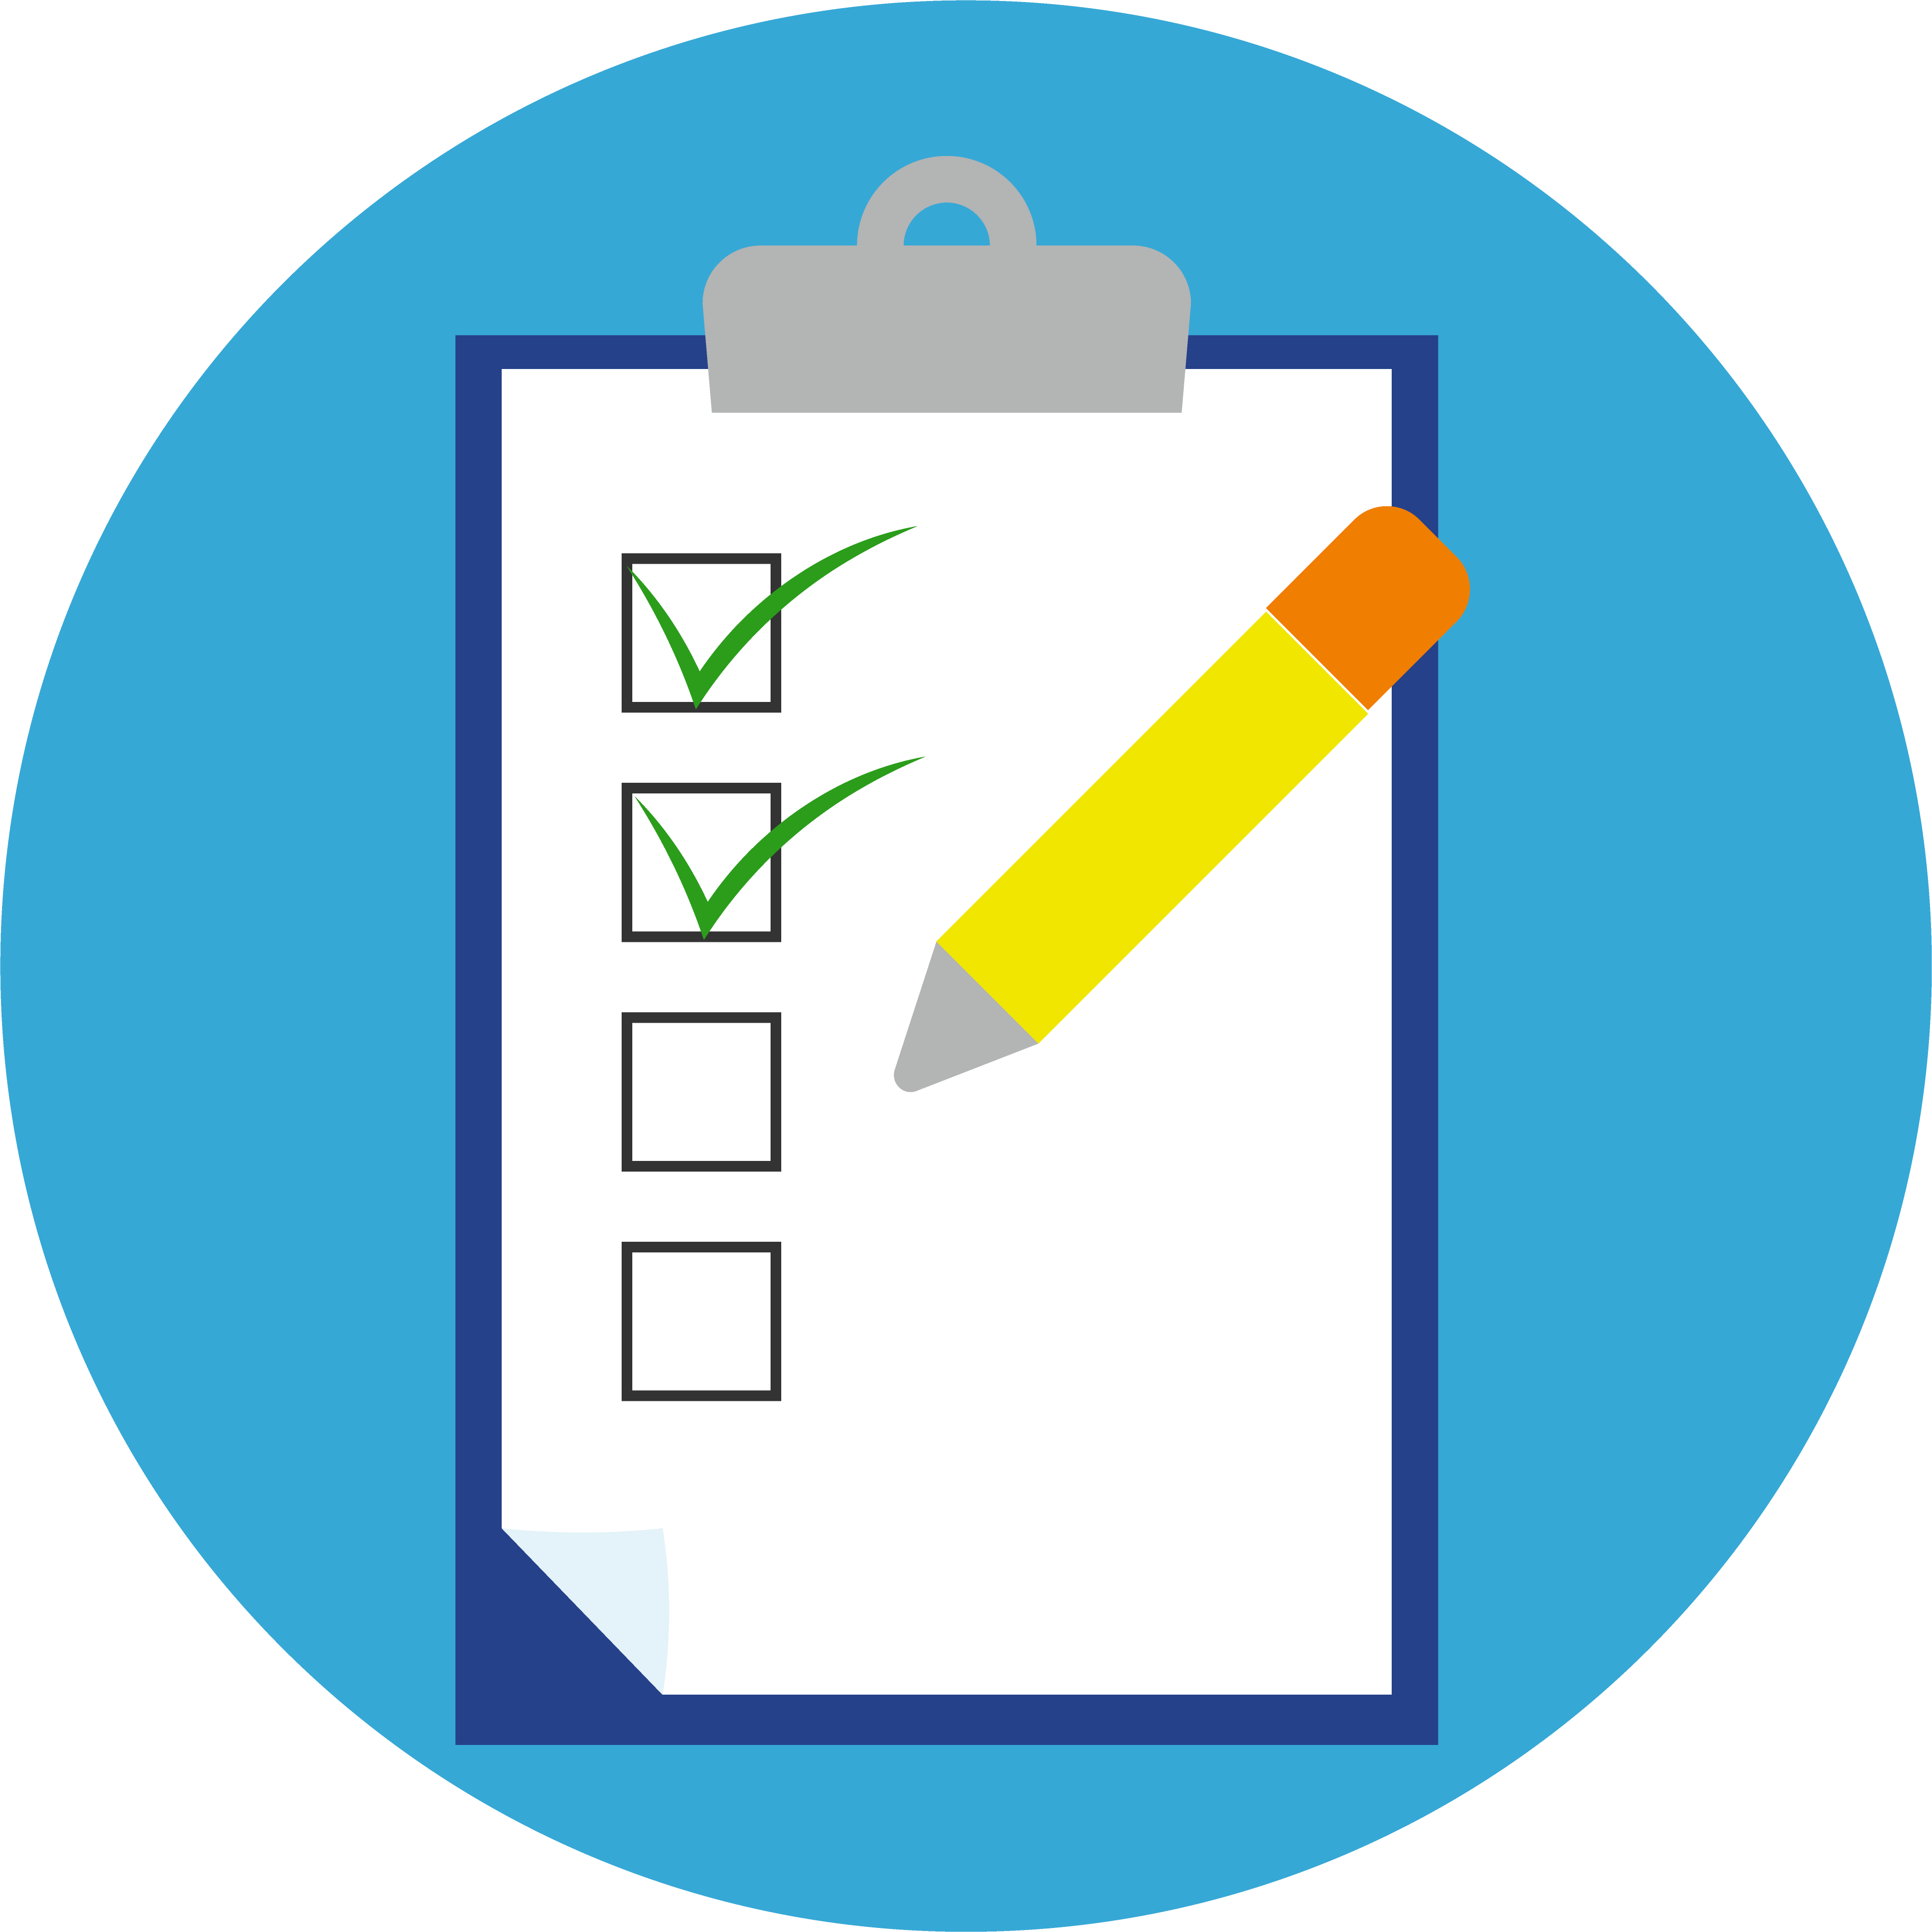 Are Your Year-End Bookkeeping Checklists Ready? - Aero Workflow